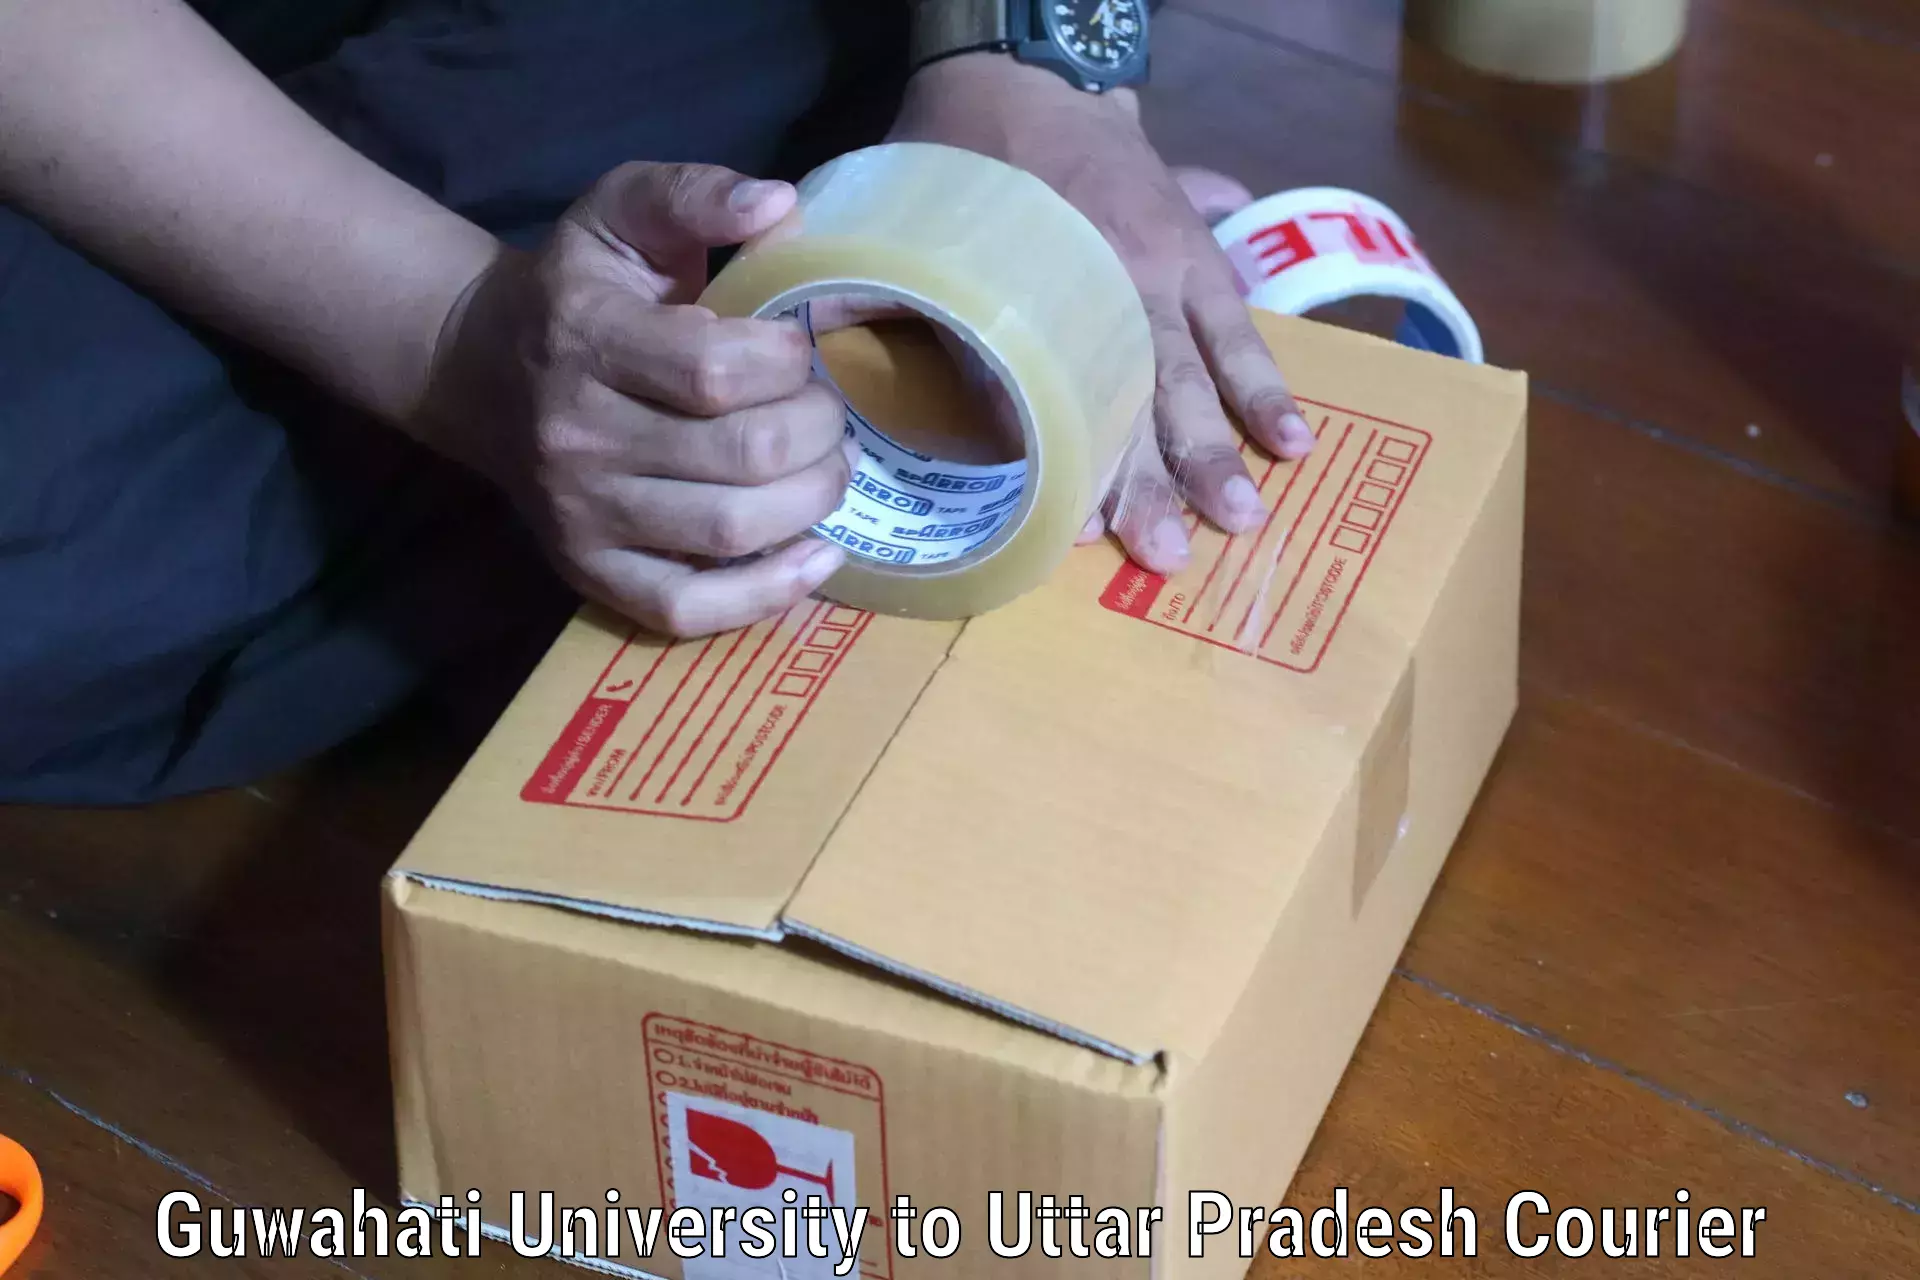 Express delivery network Guwahati University to Bhathat